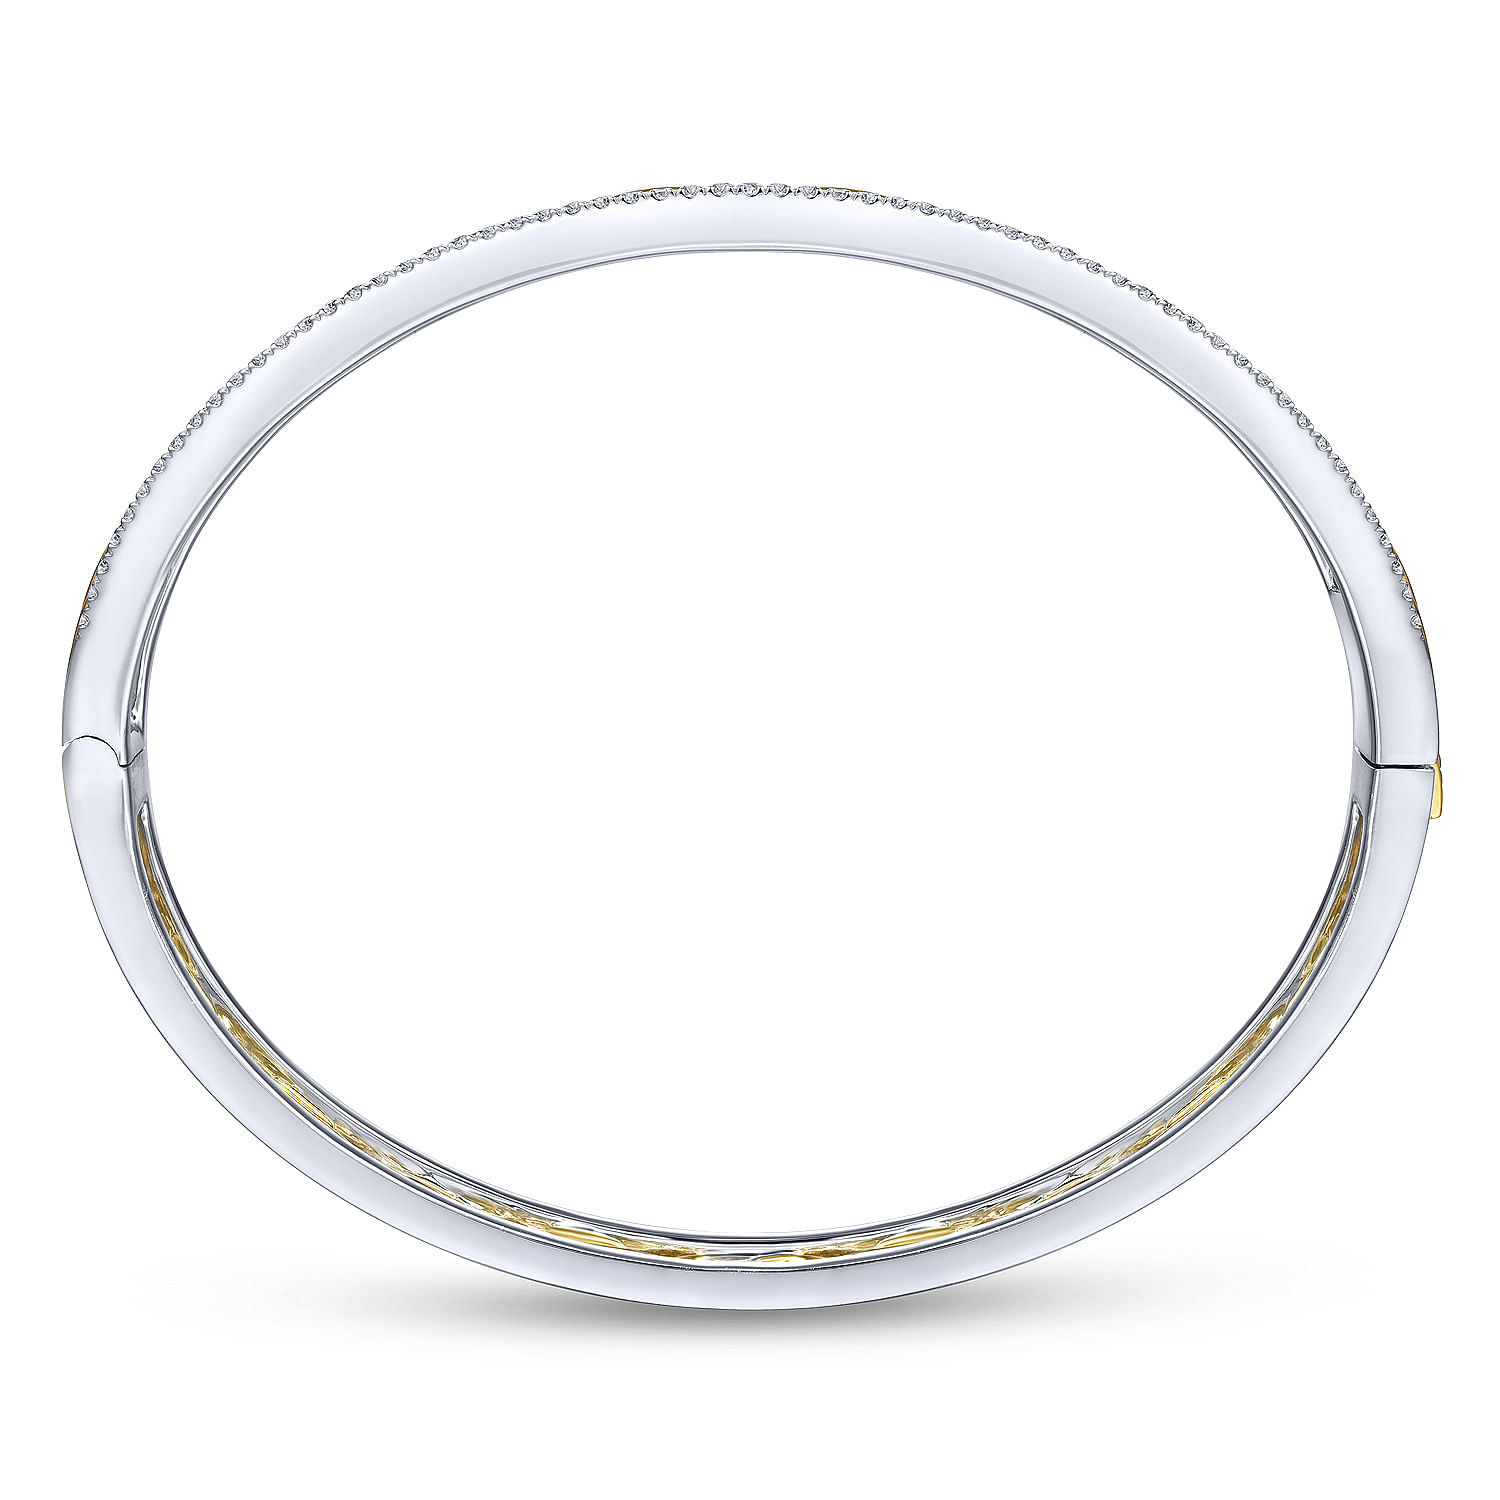 14K White and Yellow Gold Chain Link Bangle with Diamond Frame - 0.8 ct - Shot 3